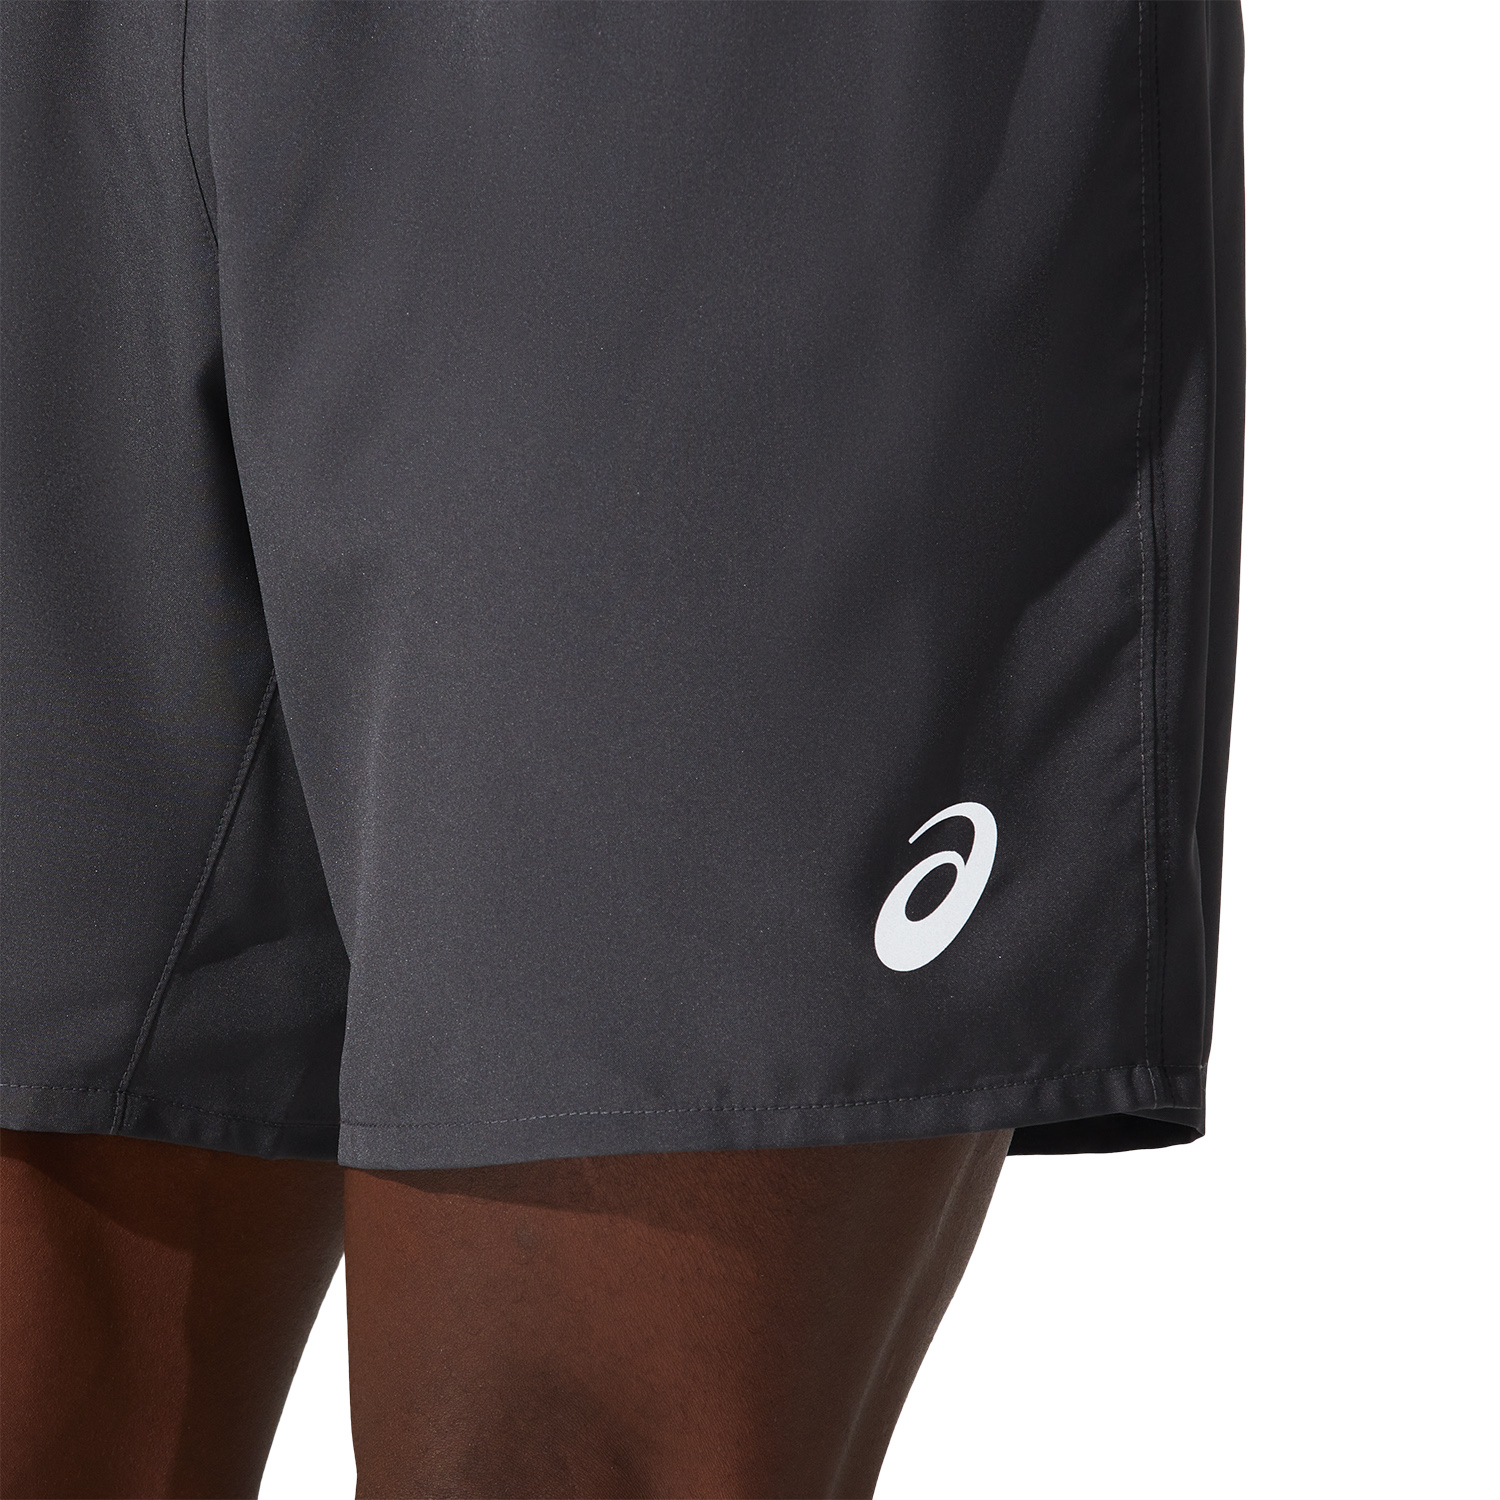 Asics Core 2 in 1 7in Shorts - Graphite Grey